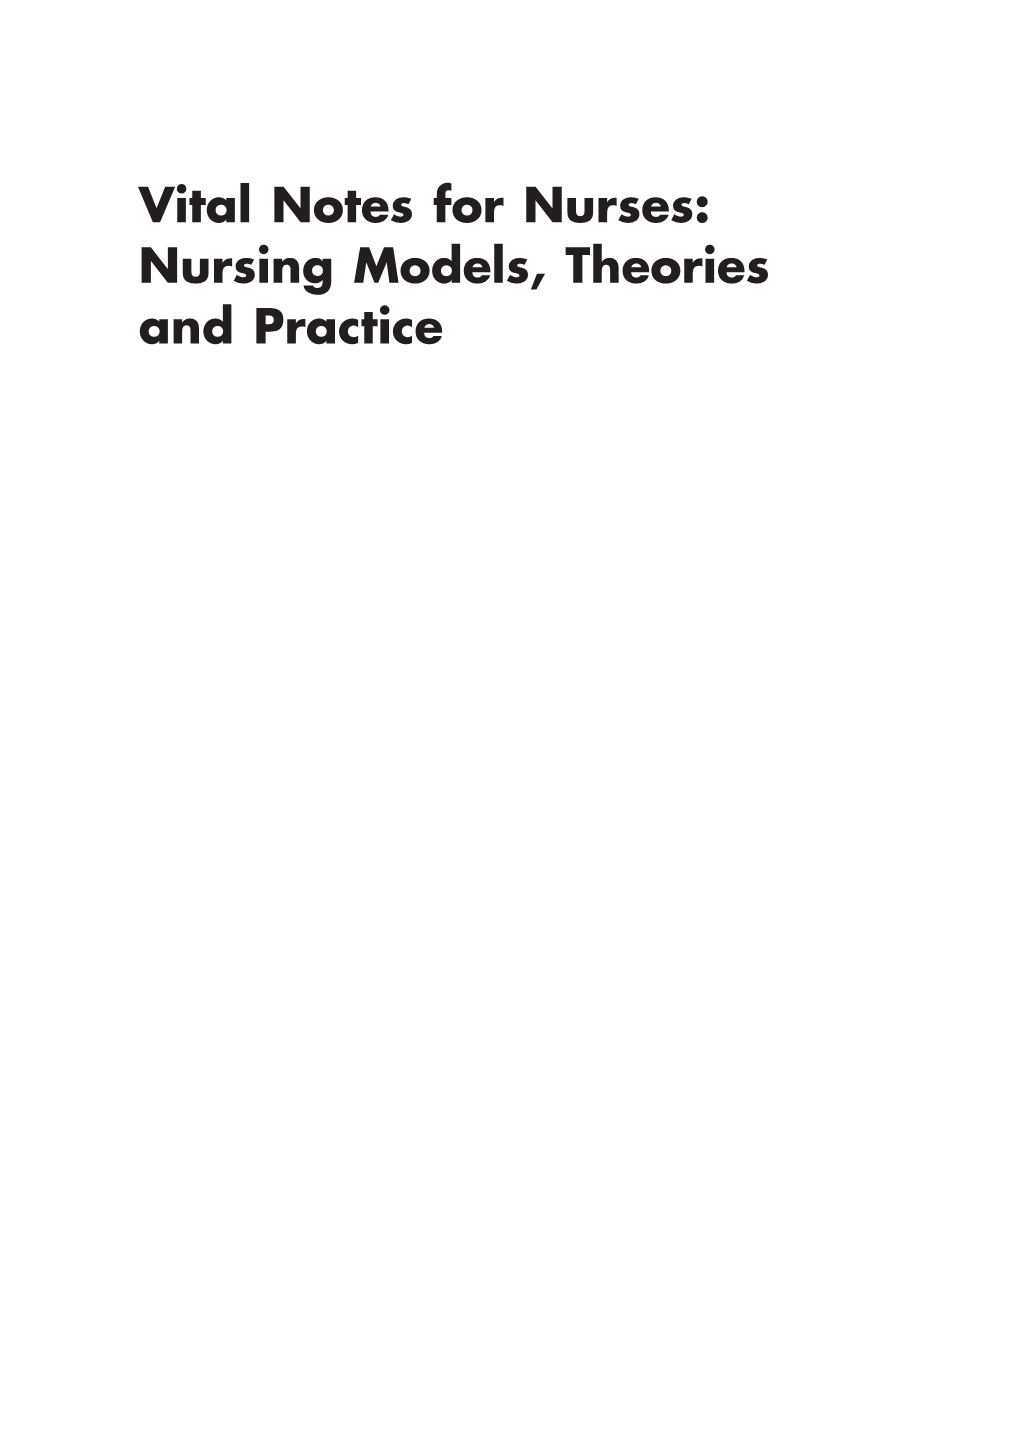 Vital Notes for Nurses: Nursing Models, Theories and Practice